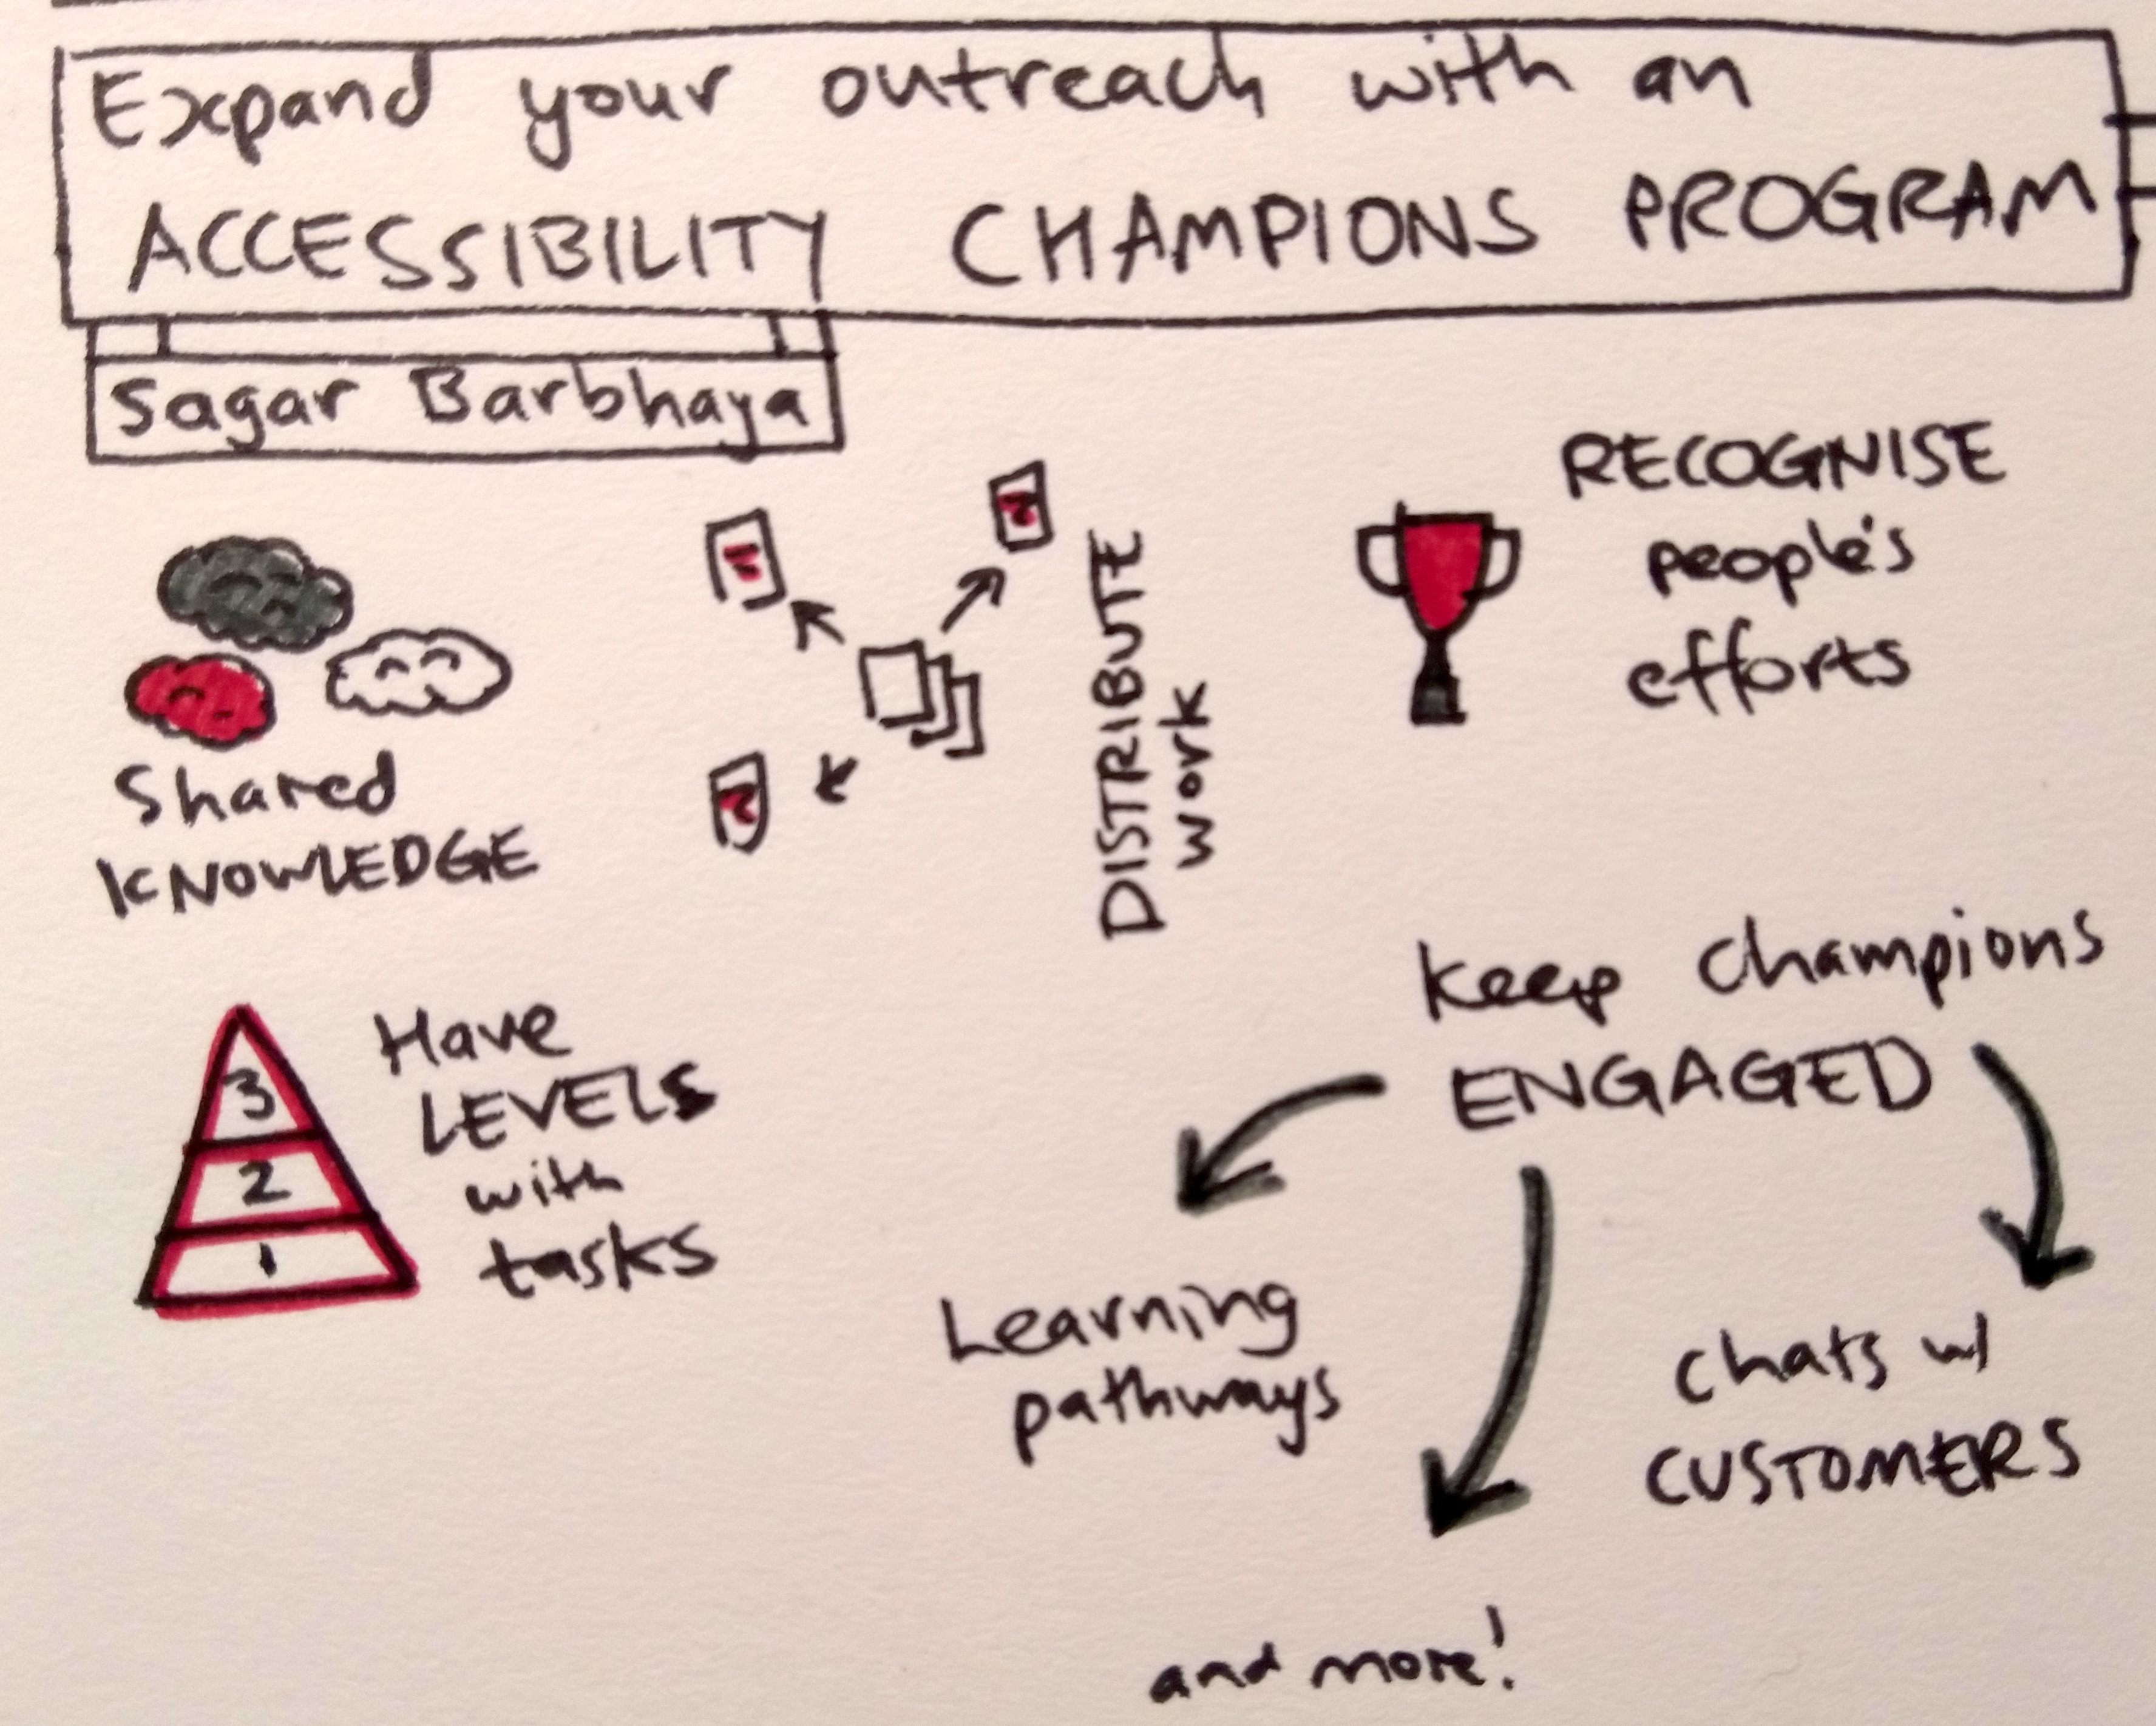 Sketchnotes for Sagar Barbhaya - Expand Your Outreach with an Accessibility Champions Program